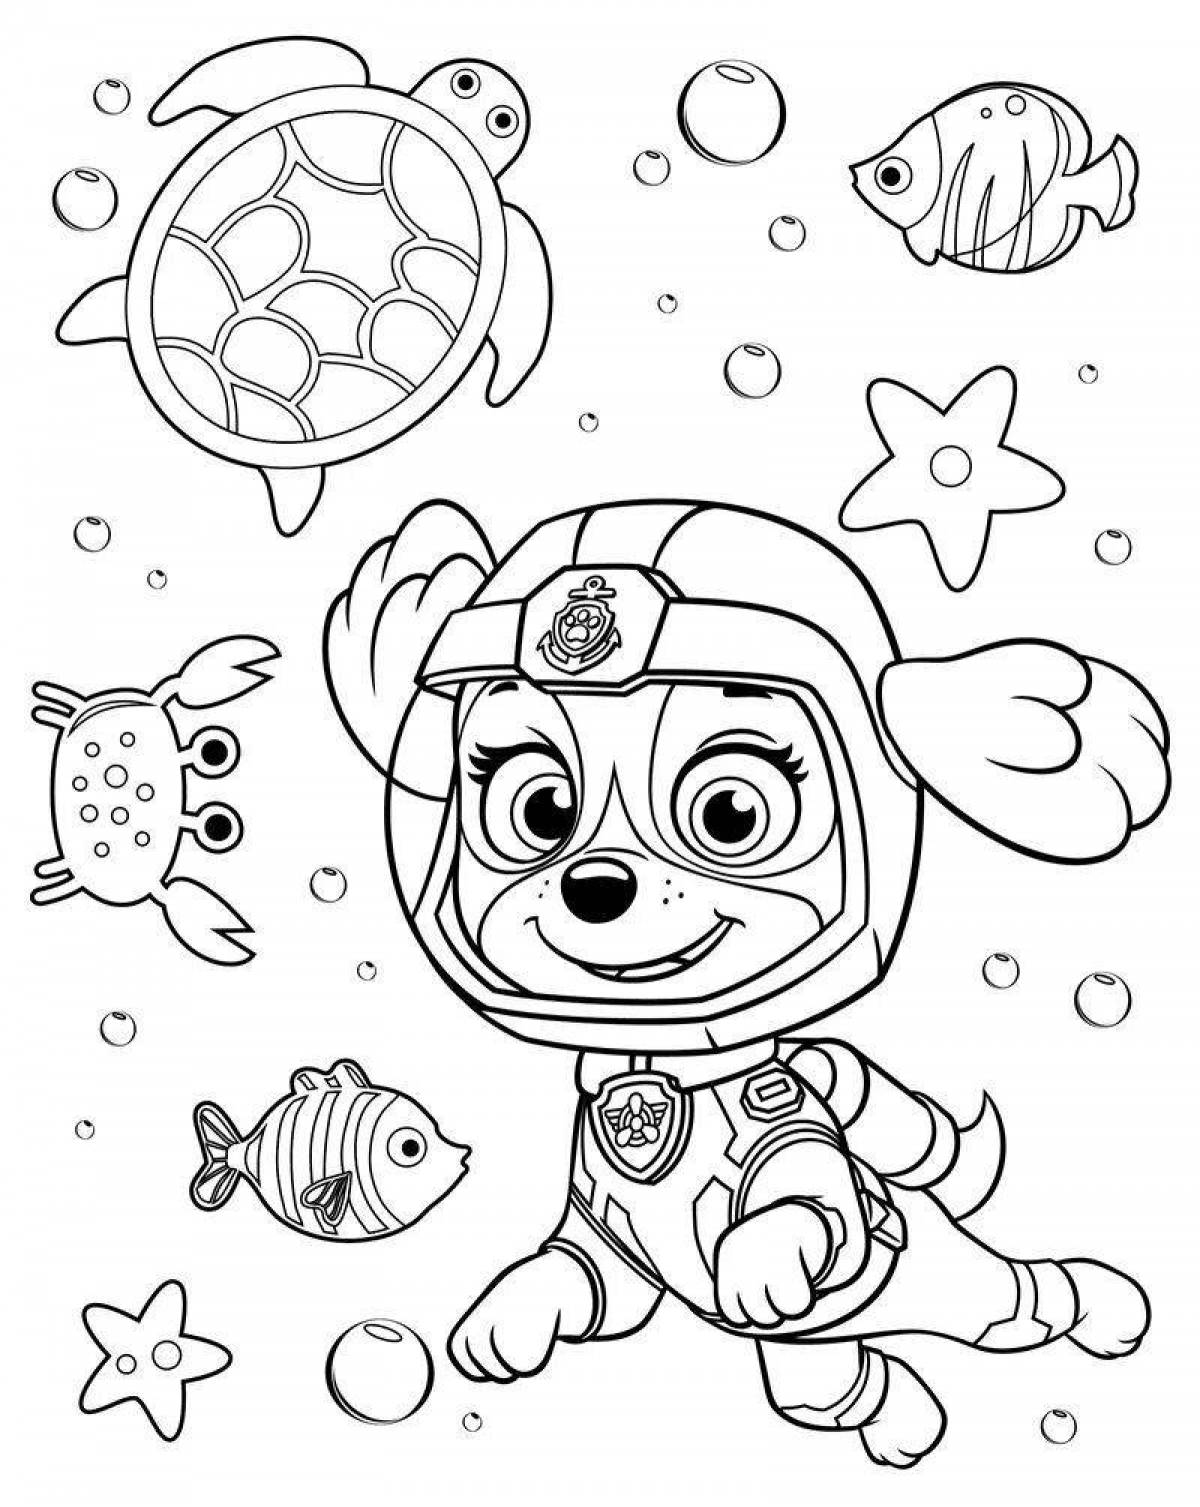 Adorable Paw Patrol coloring book for 5 year olds